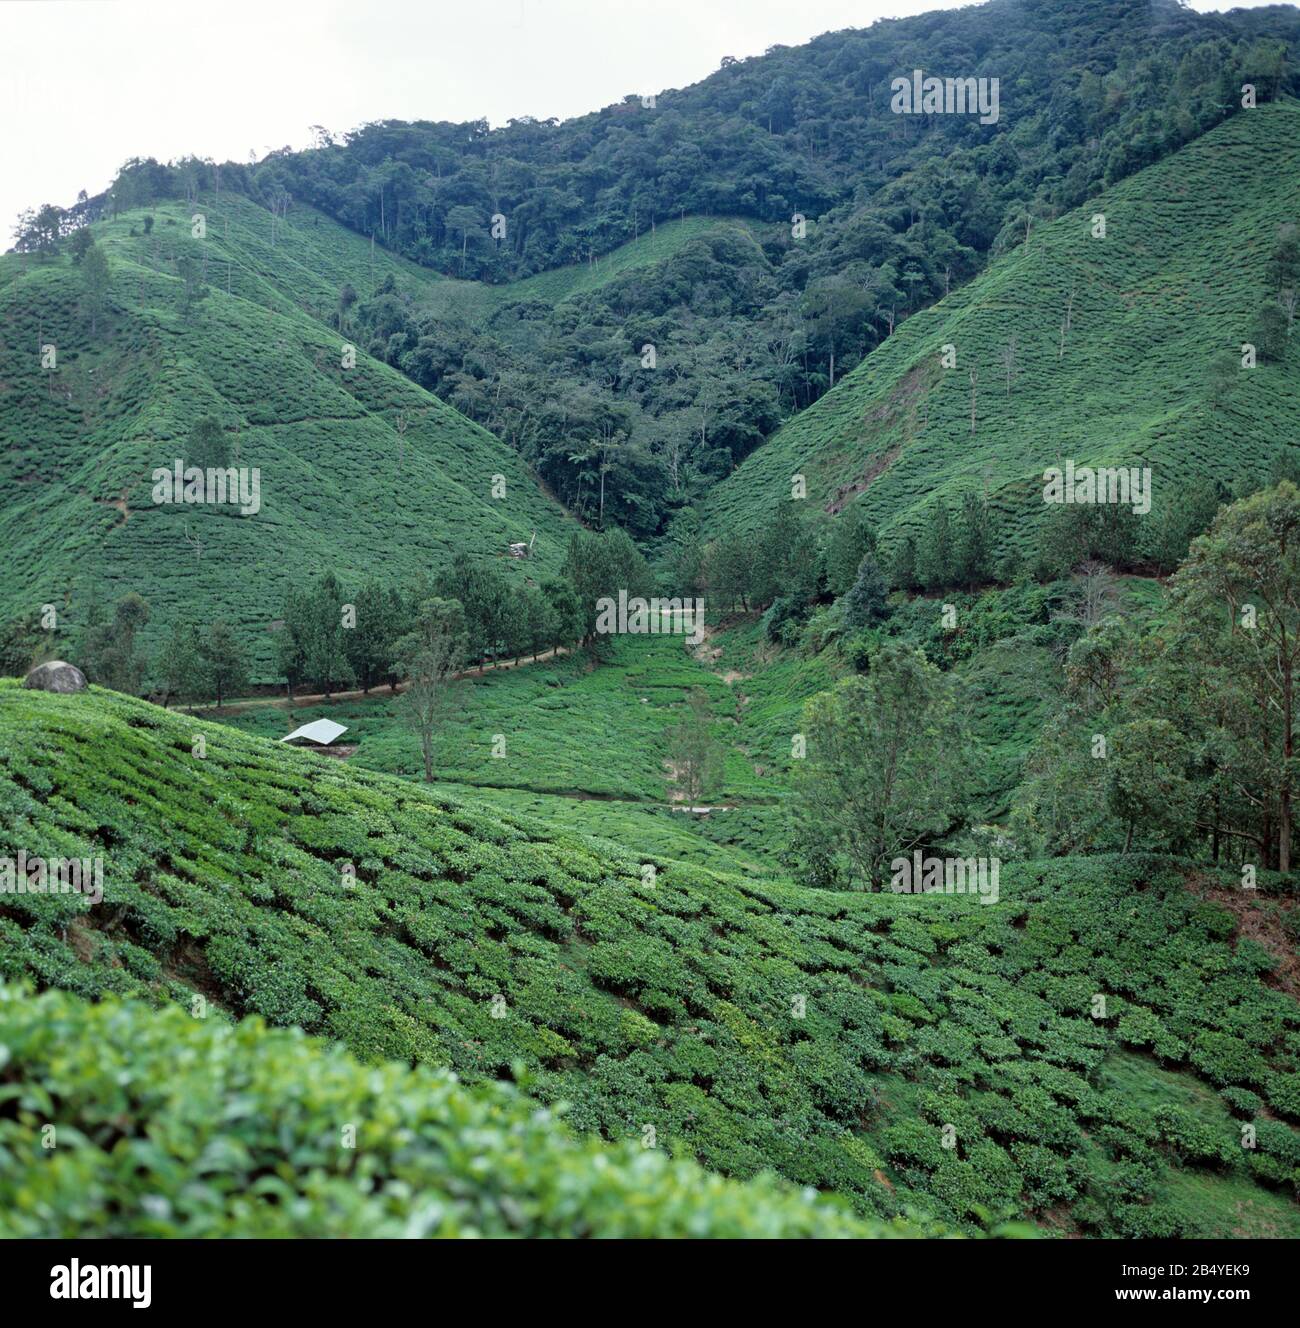 Picturesque steep tea (Camelia sinensis) estate plantations in mountainous countryside in the Cameron Highlands of Malaysia, February Stock Photo